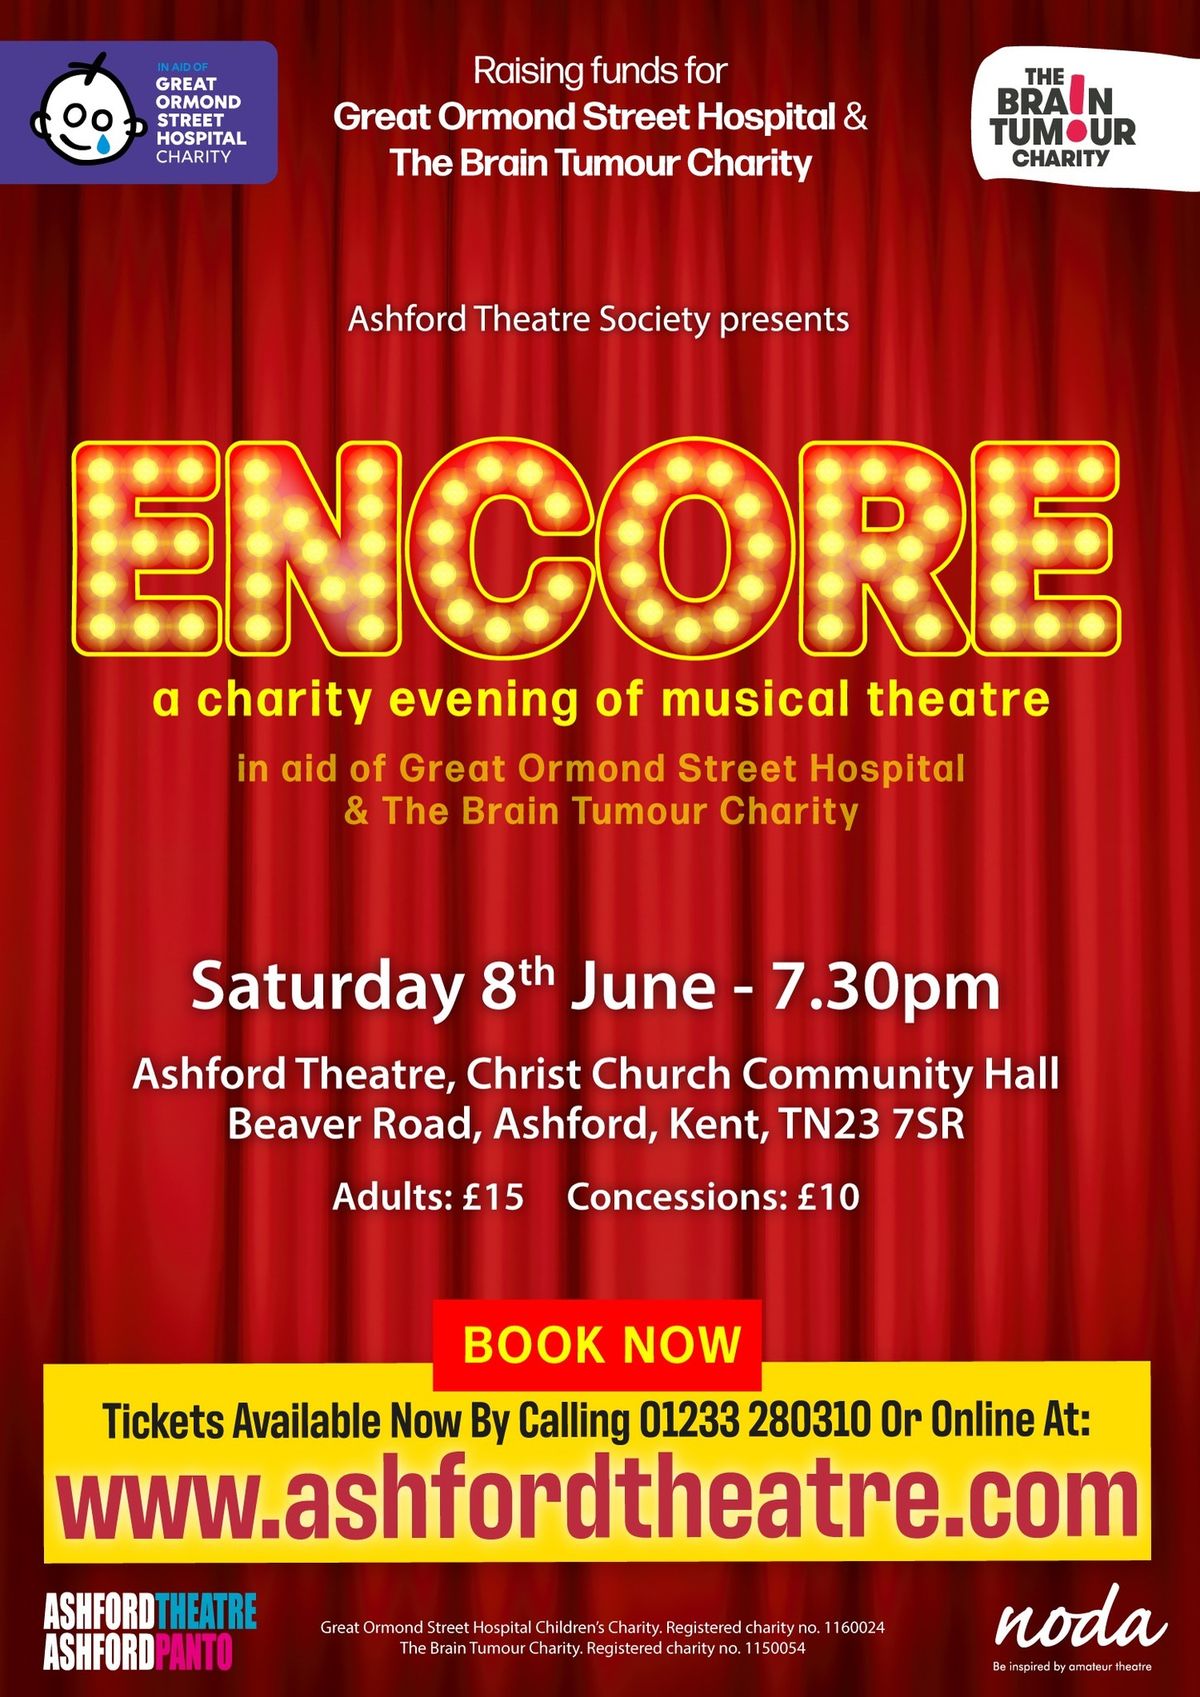 Encore - A charity evening of musical theatre